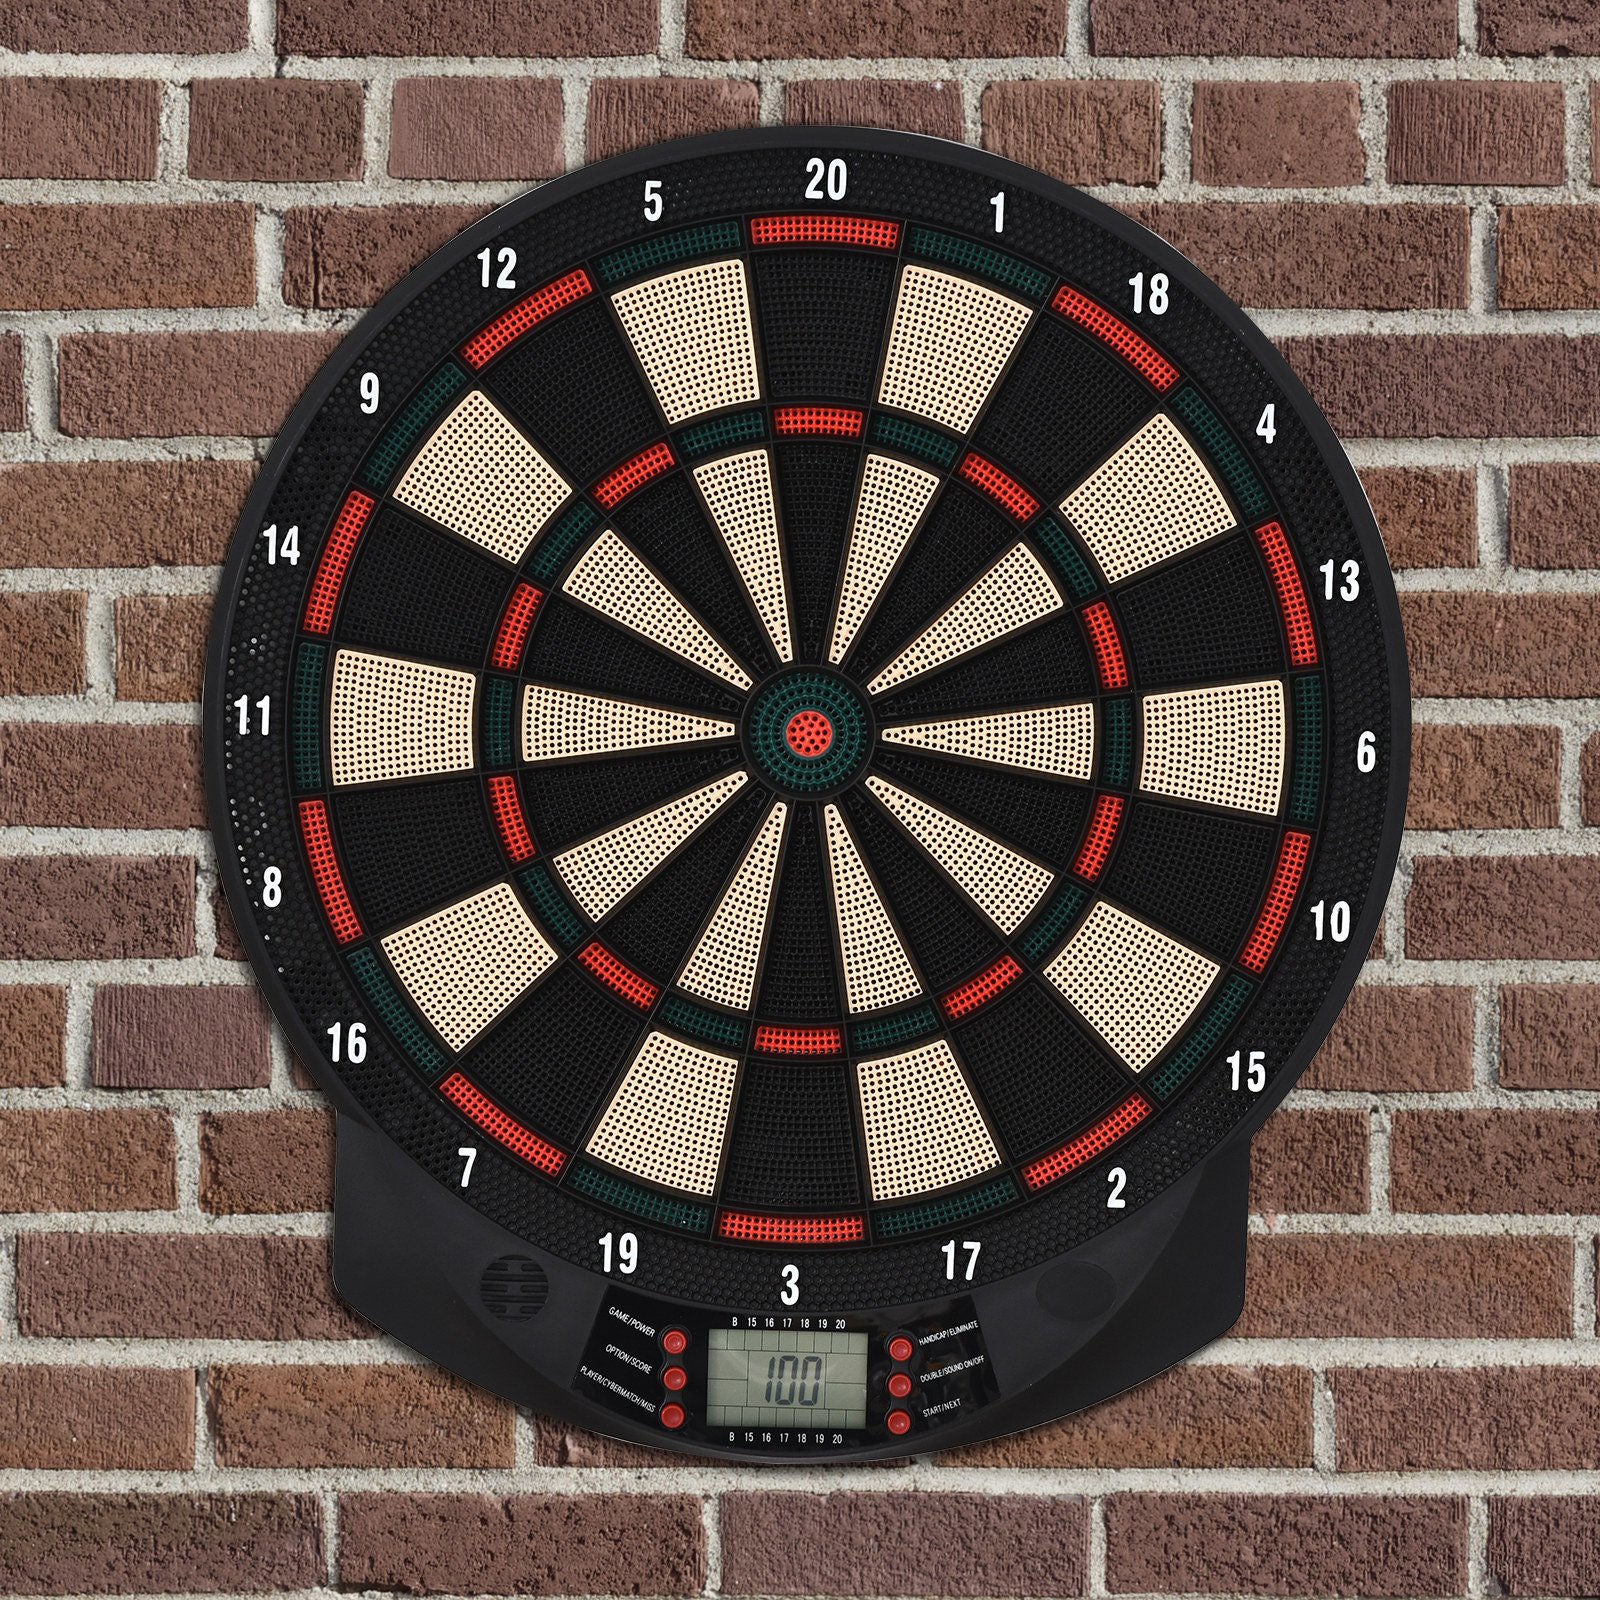 Nancy's Aces Lake Electronic dartboard with 6 darts, 30 dart heads, 26 games and 185 scoring options for 8 players, Sound effects